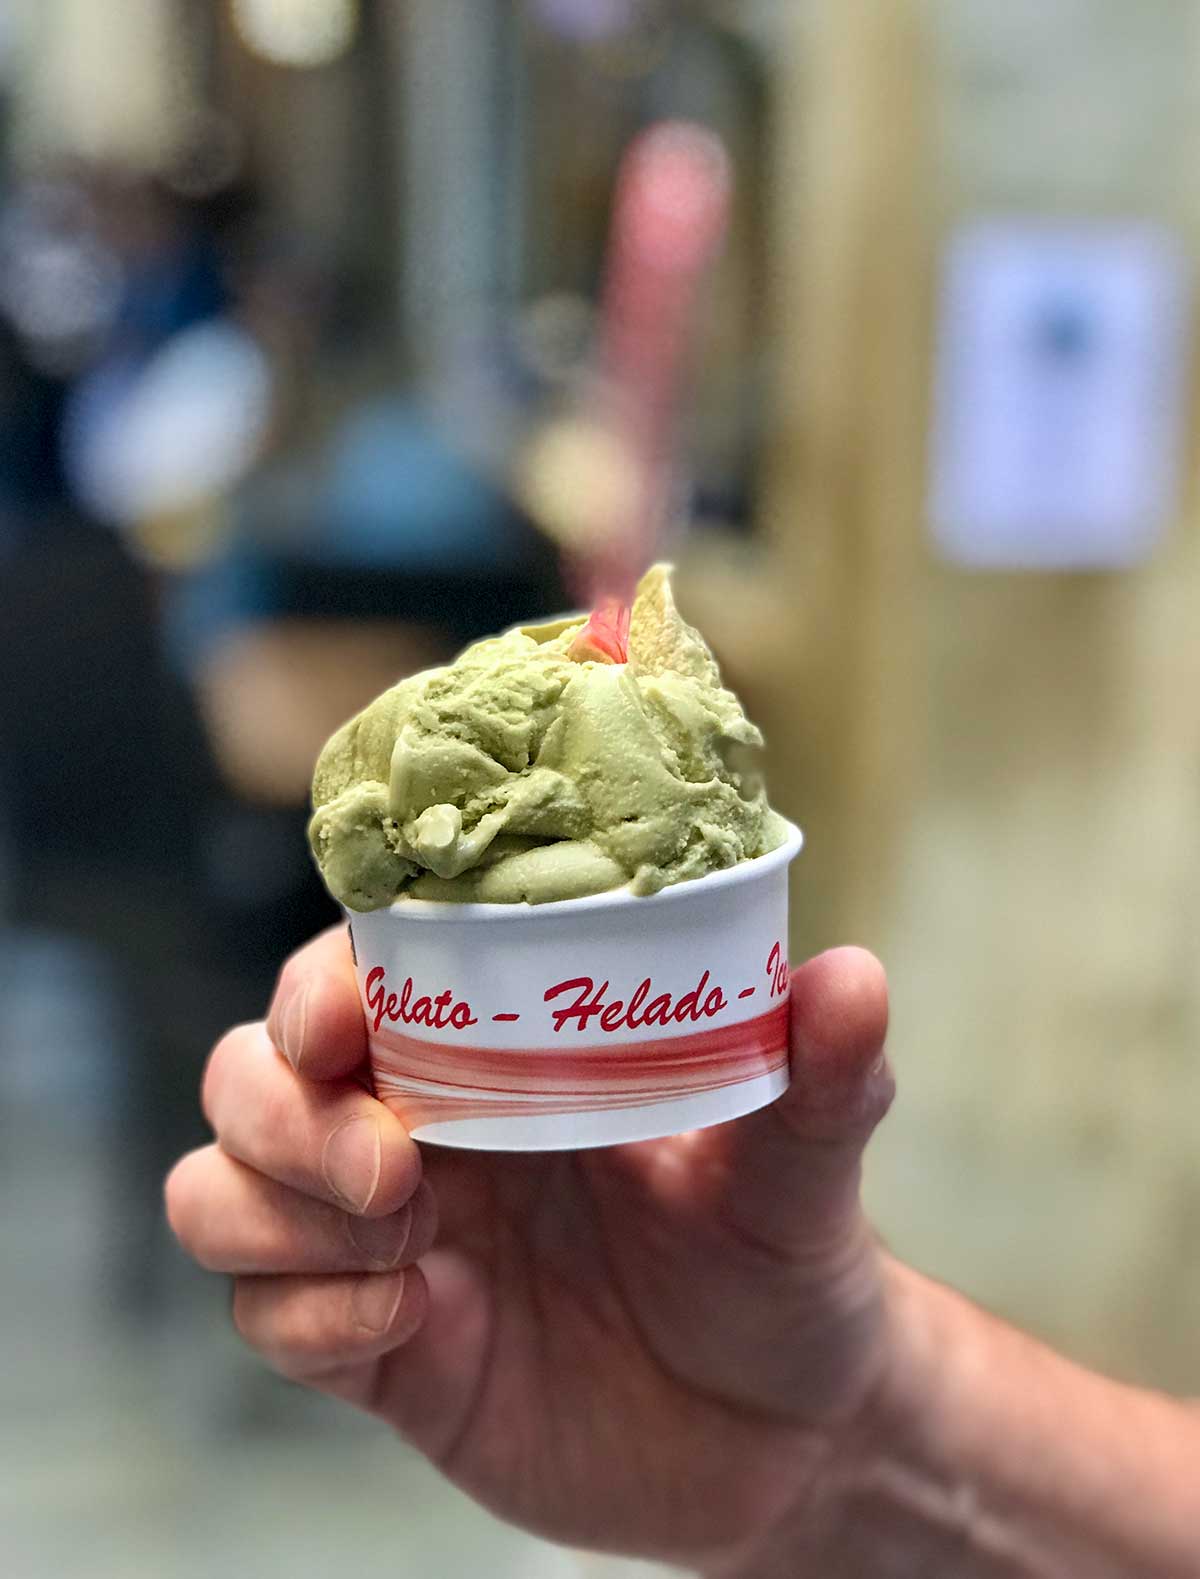 A man's hand holding a cup of pistachio gelato in Venice, Italy